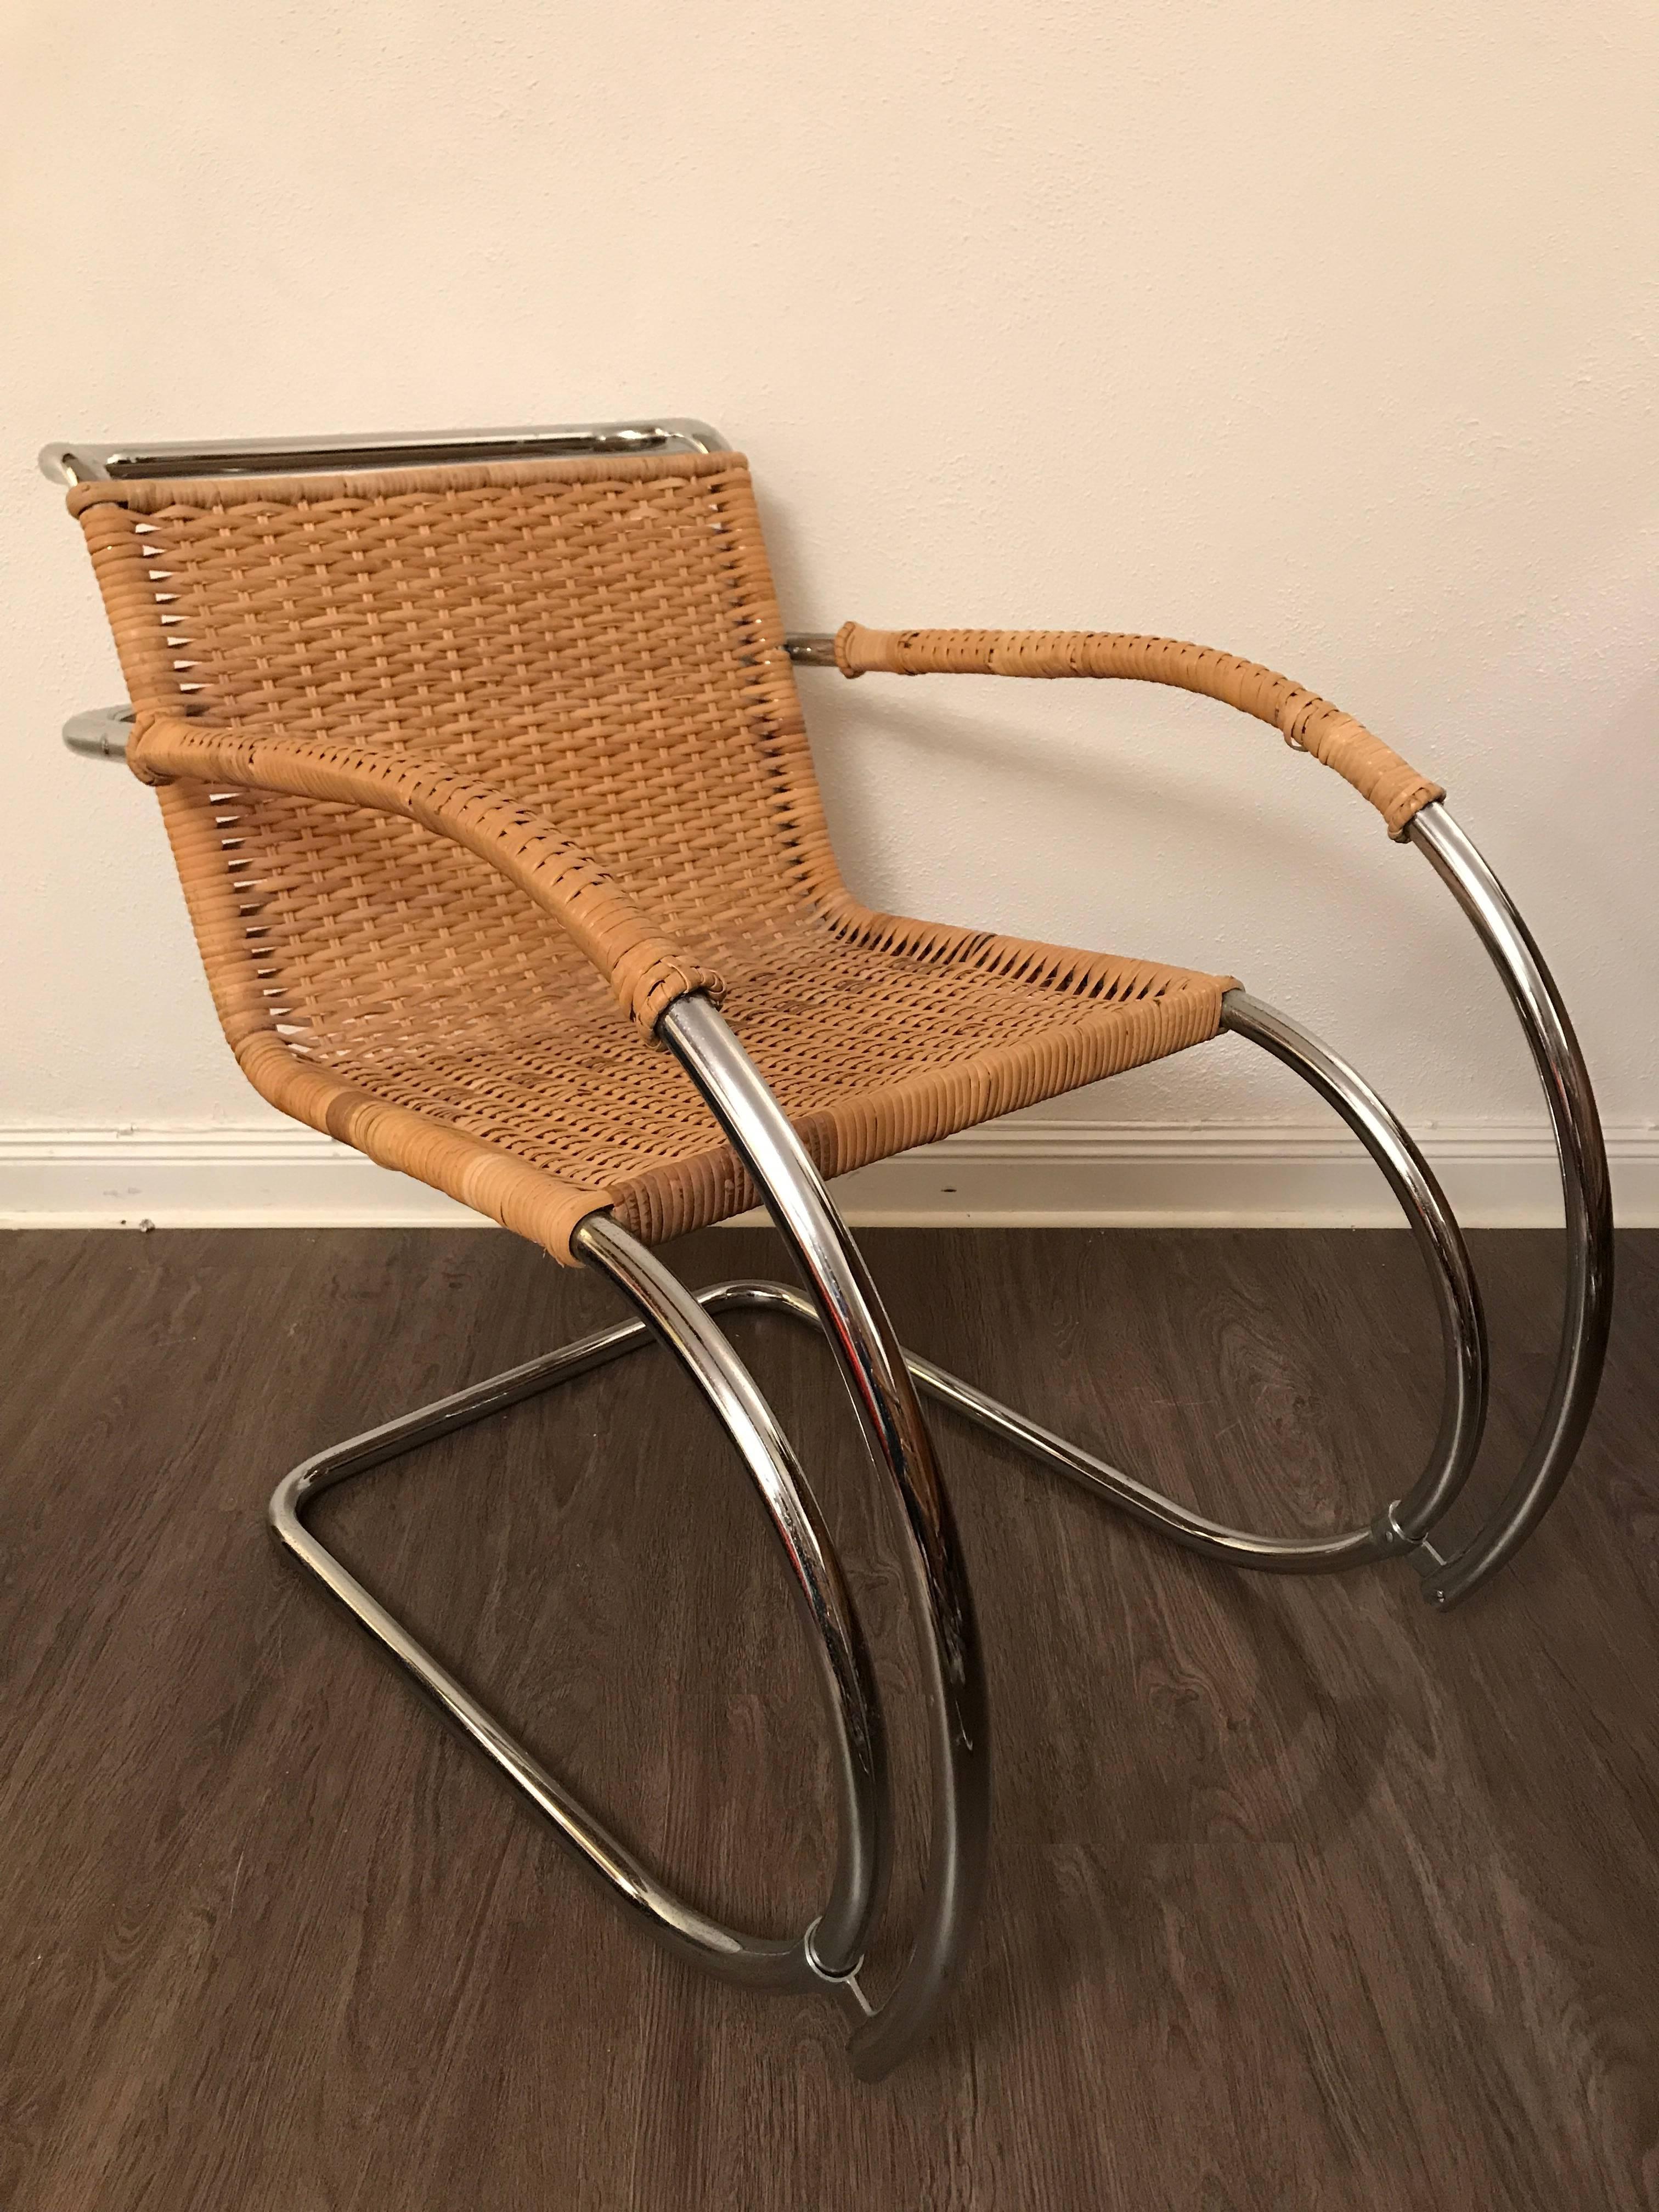 Pair of Mid-20th Century Ludwig Mies van der Rohe MR20 Rattan Chrome Armchairs 2